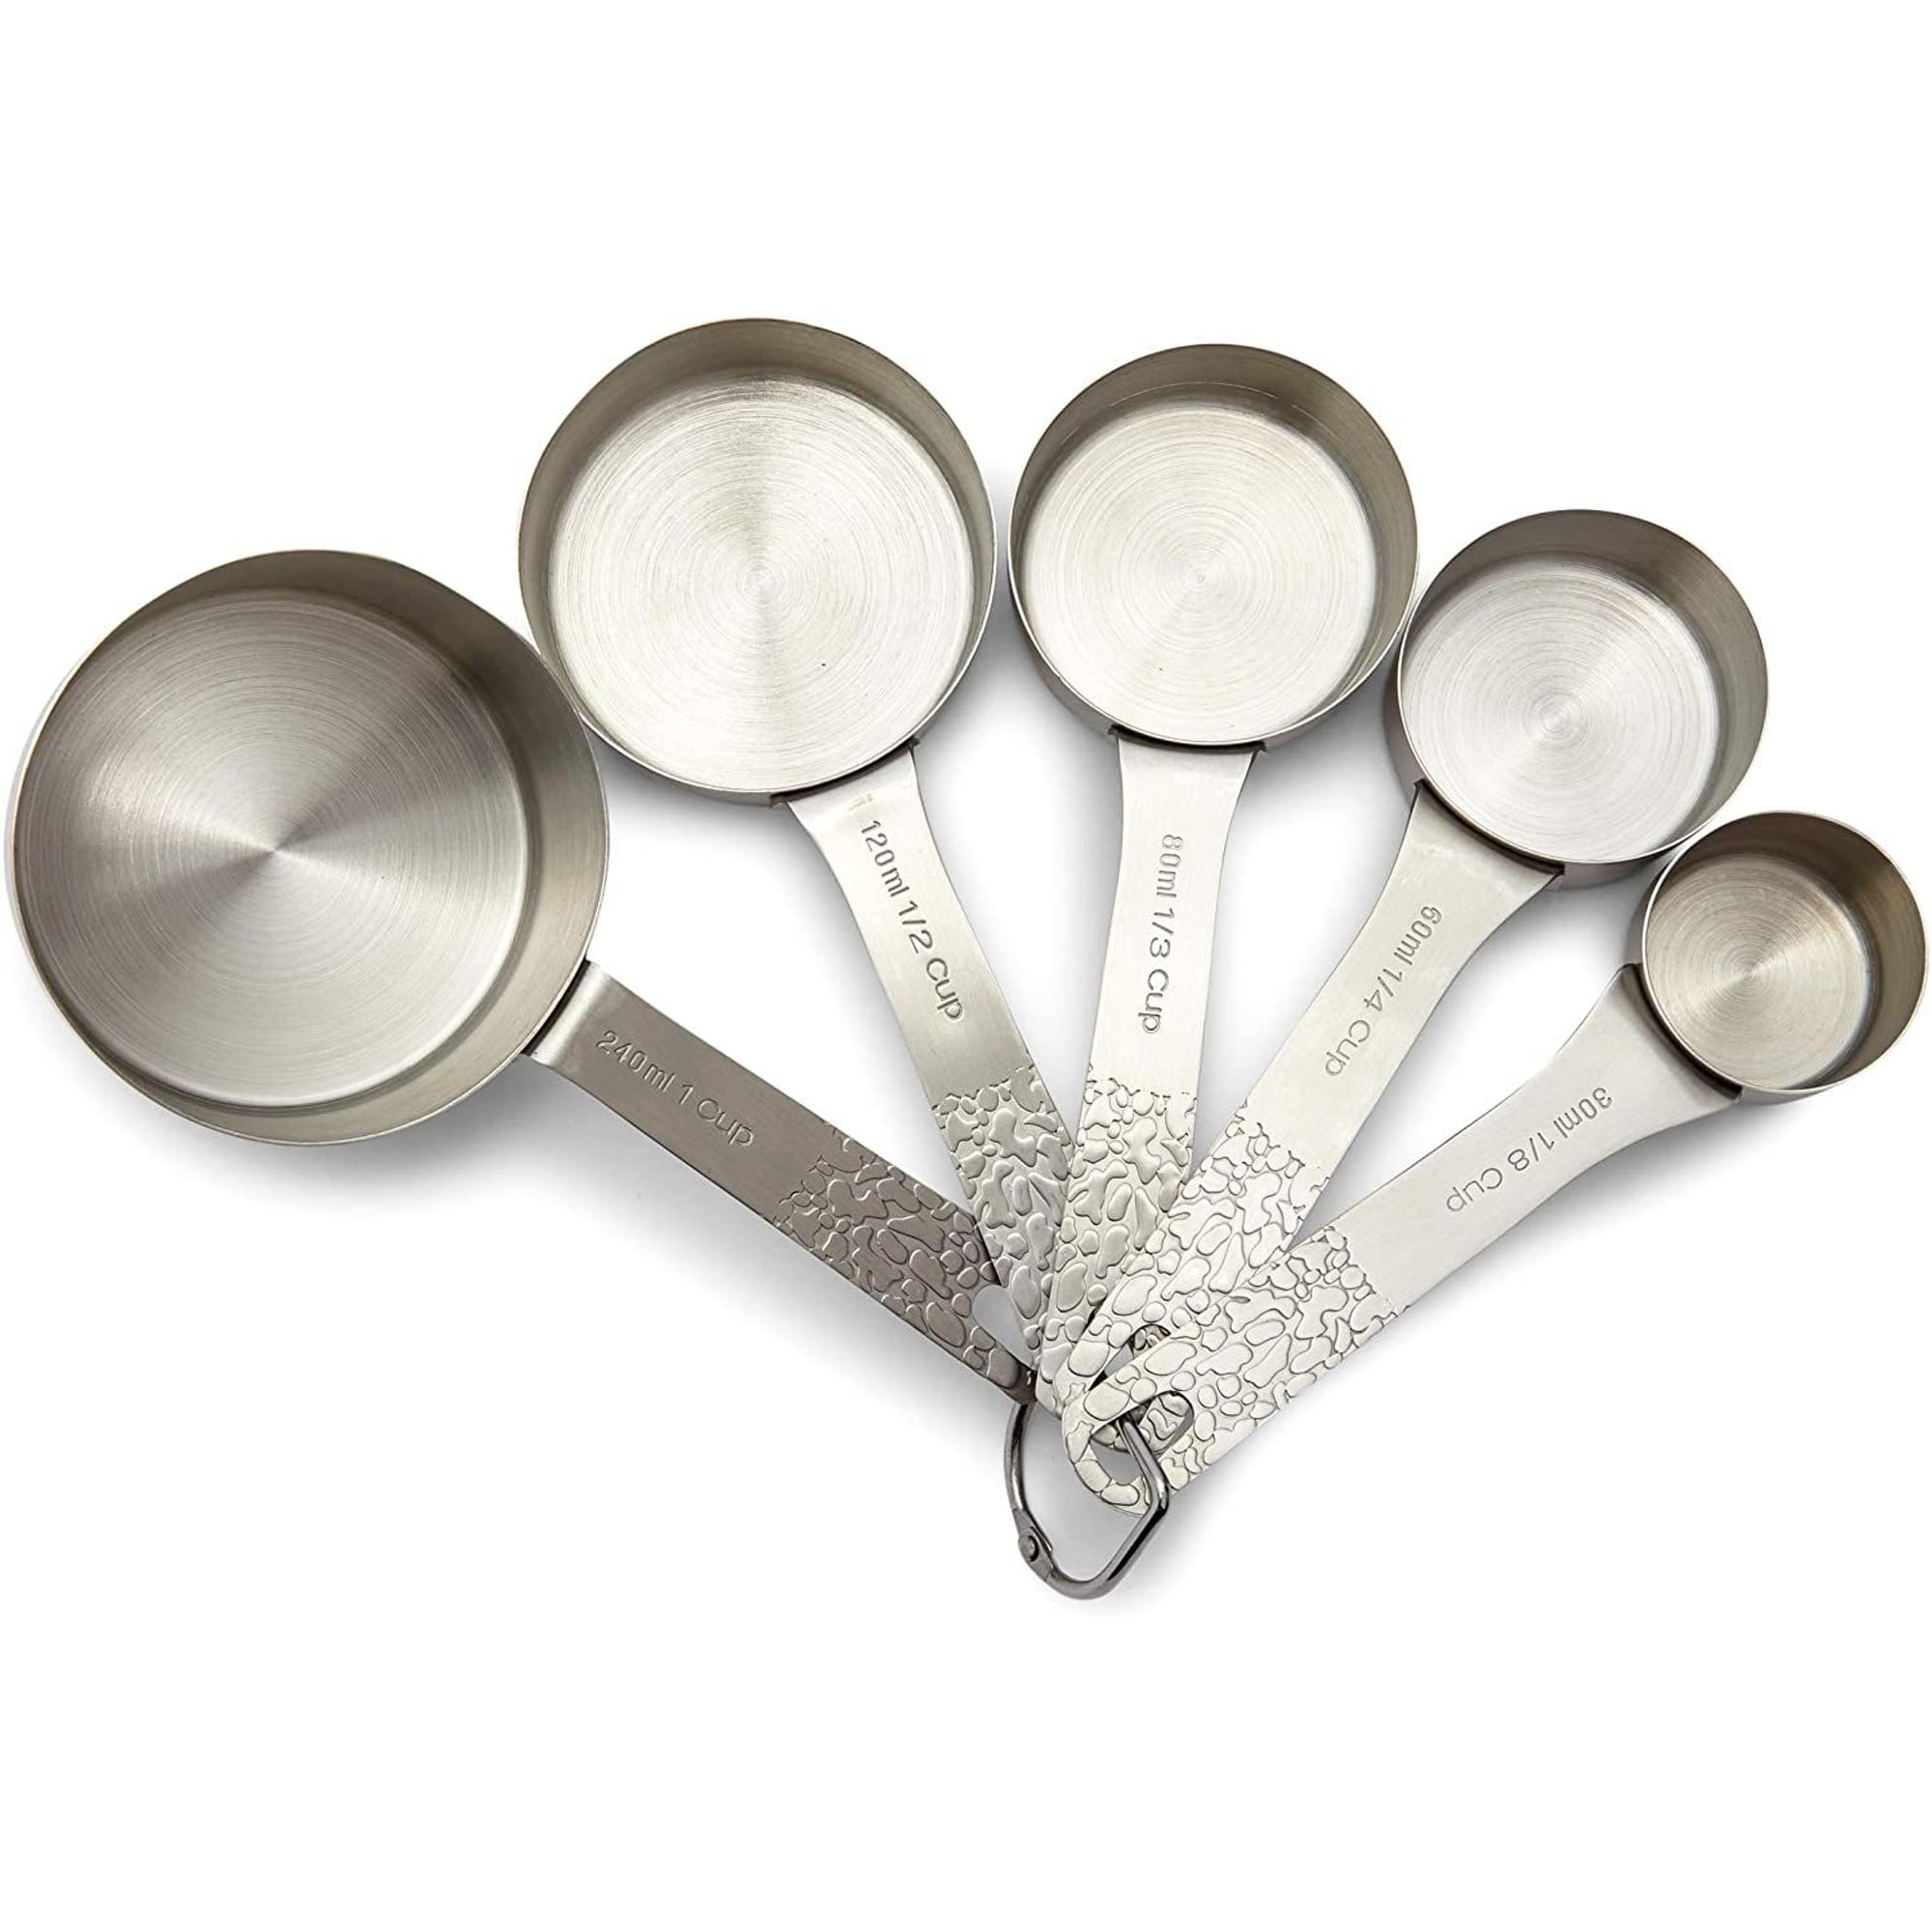 https://ak1.ostkcdn.com/images/products/is/images/direct/45d8bdbcd45a0dca80c4bb9708d52a2e21a78274/Stainless-Steel-Measuring-Cup-and-Spoon-Set%2C-US-and-Metric-Measurements-%2811-Sizes%29.jpg